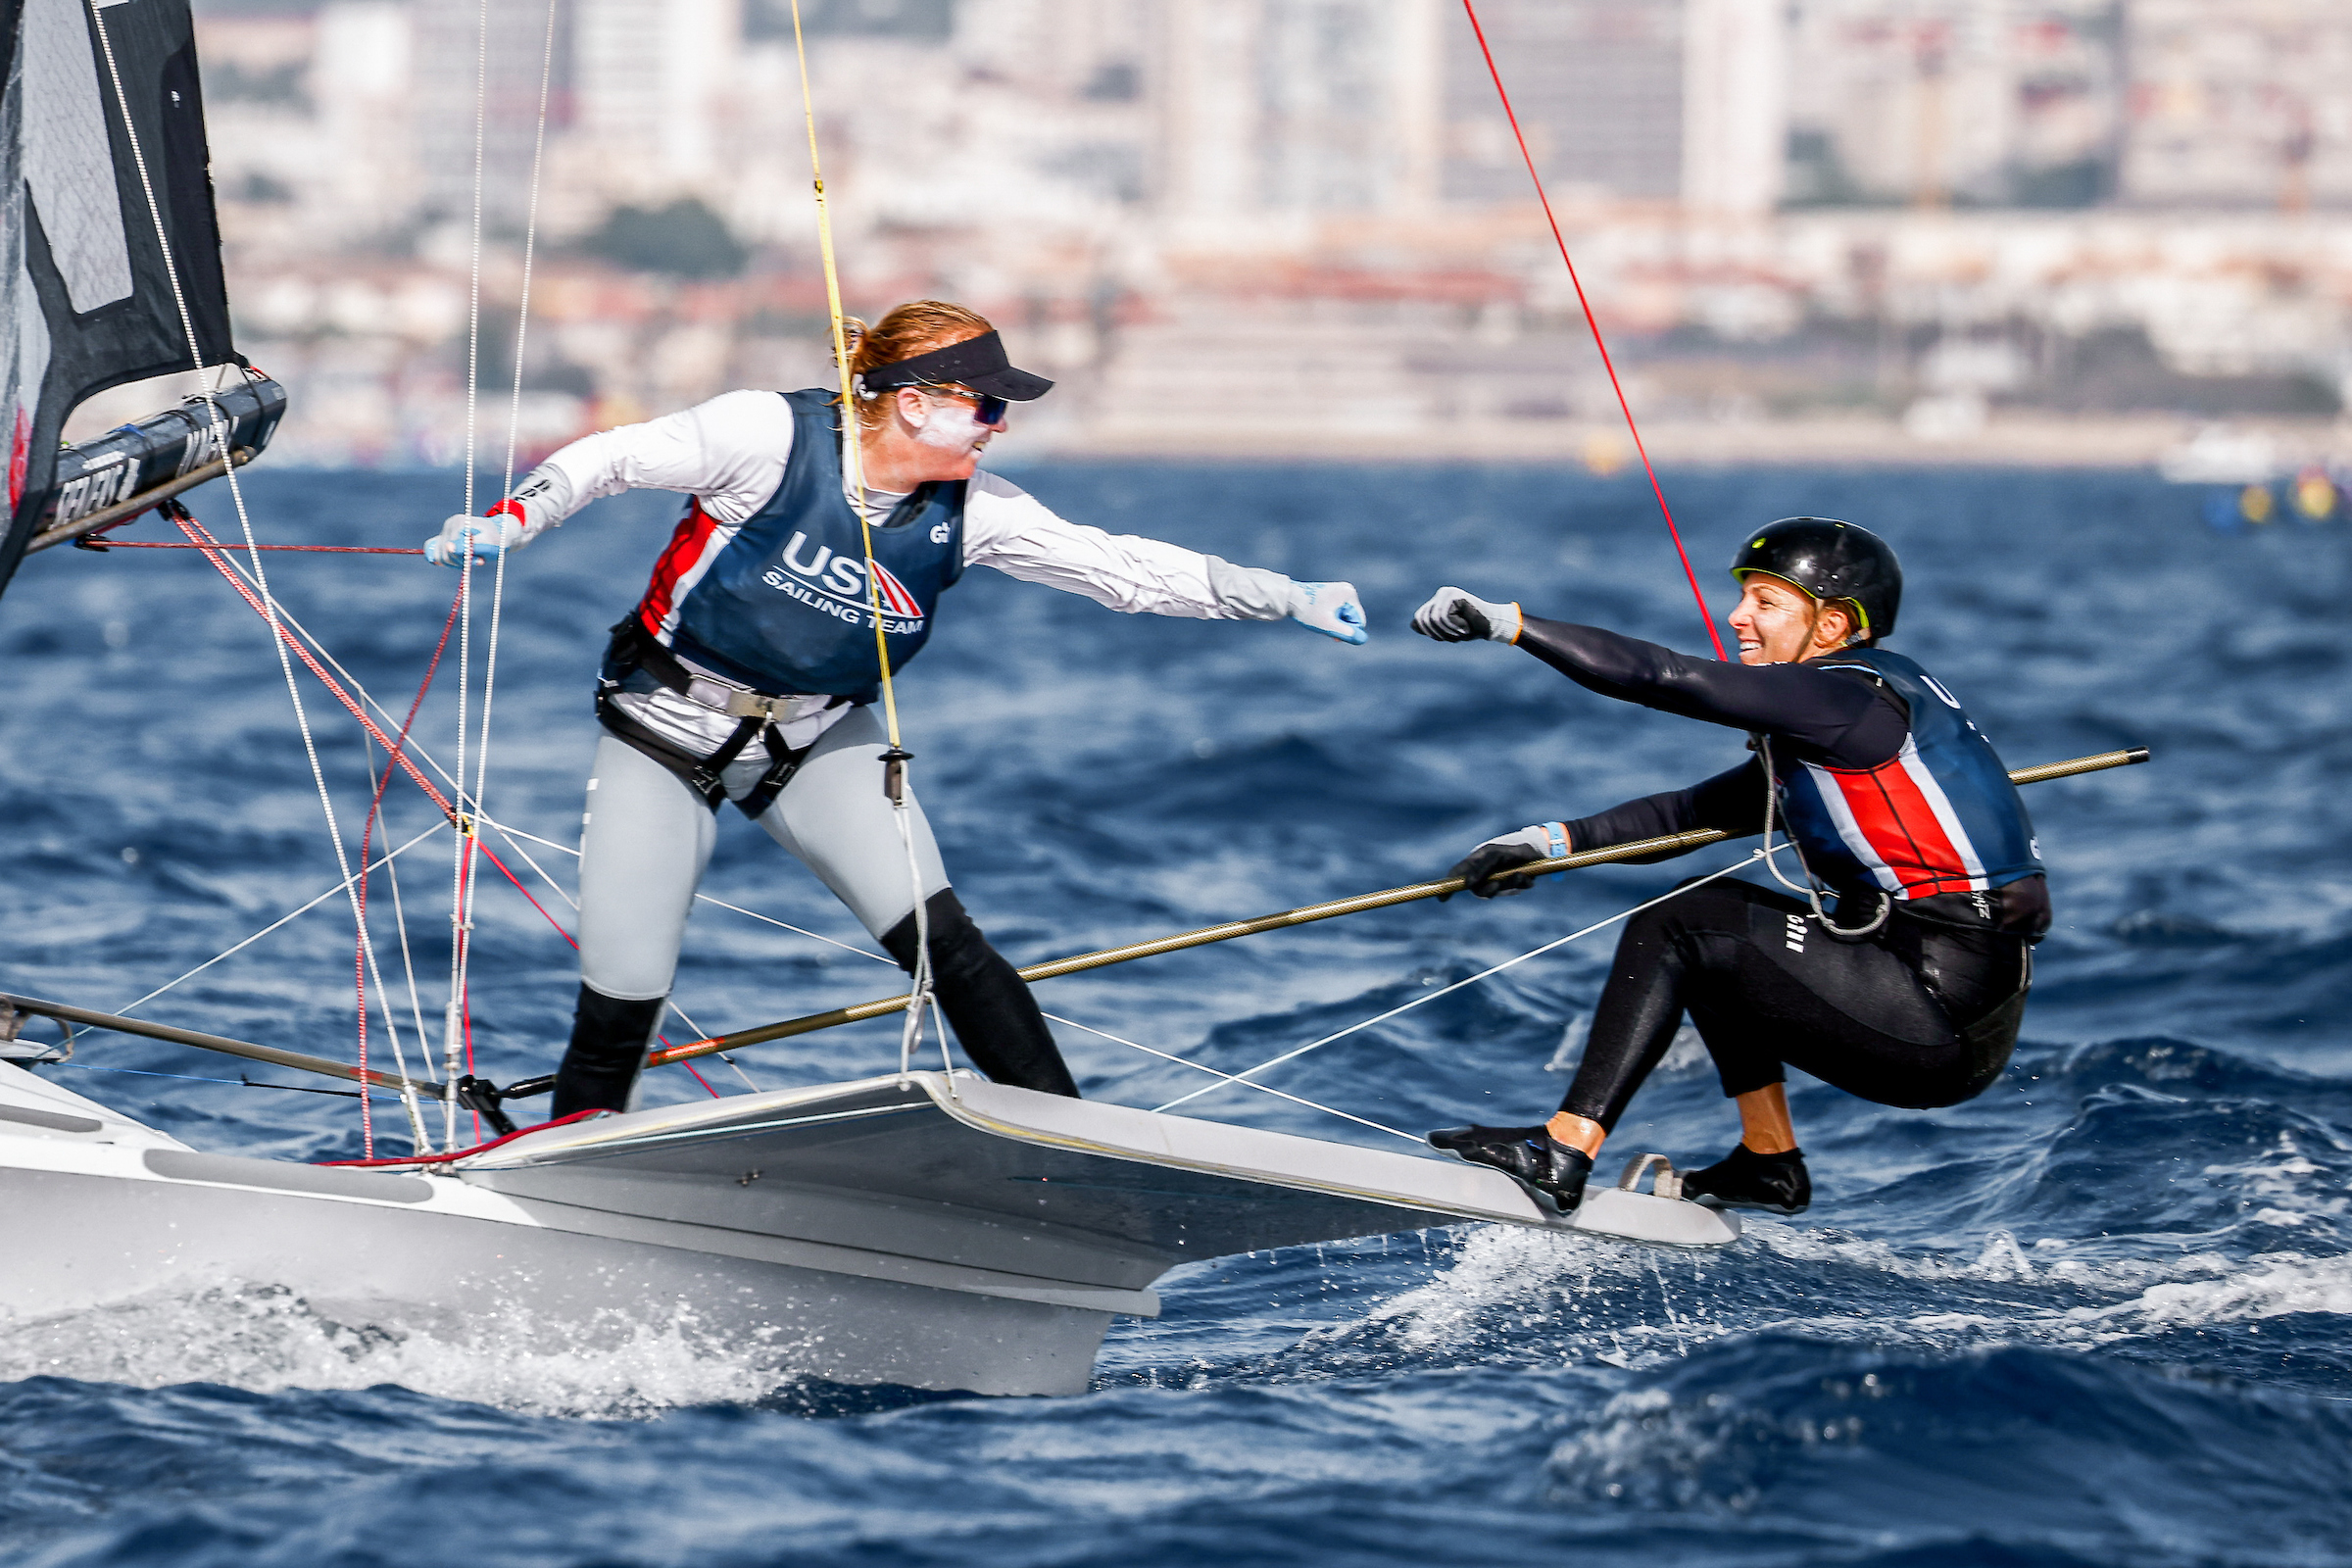 Maggie Shea and Stephanie Roble sailing at a Paris test event in July 2023. (Courtesy of US Sailing)